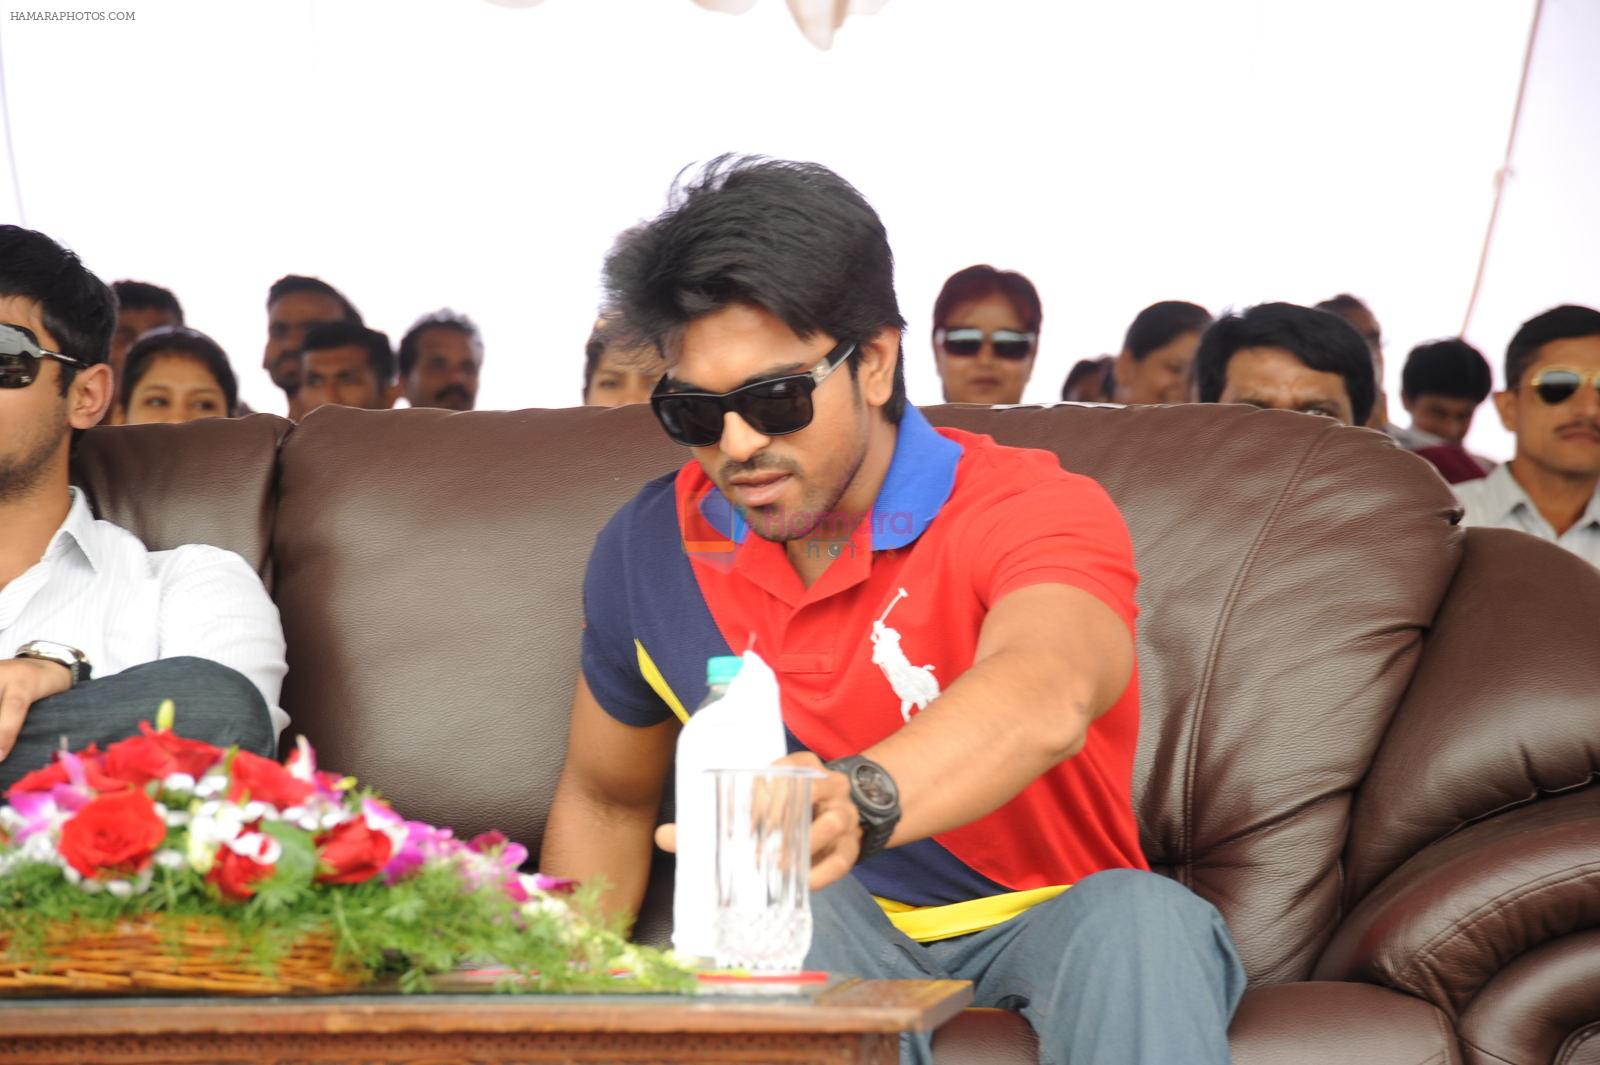 Ram Charan Tej attends POLO Game Final Event on 6th September 2011